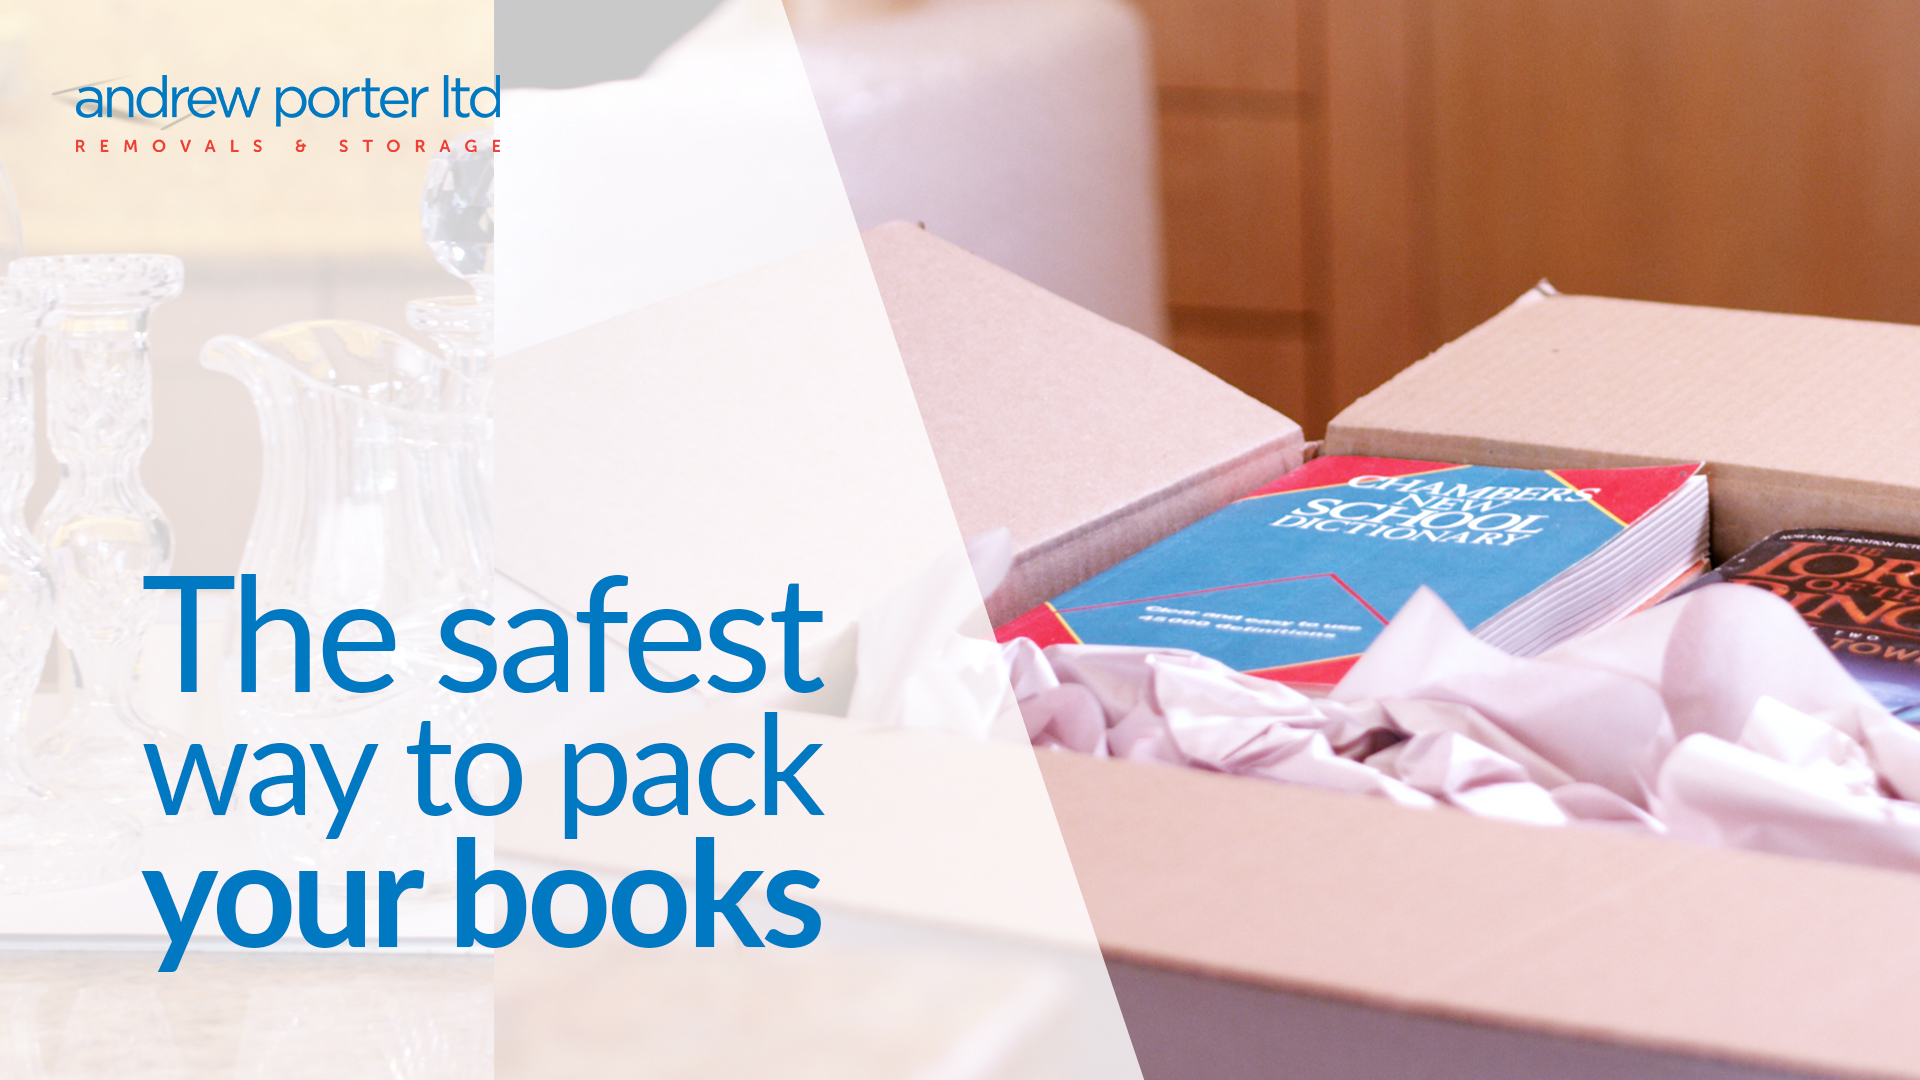 The safest way to pack your books